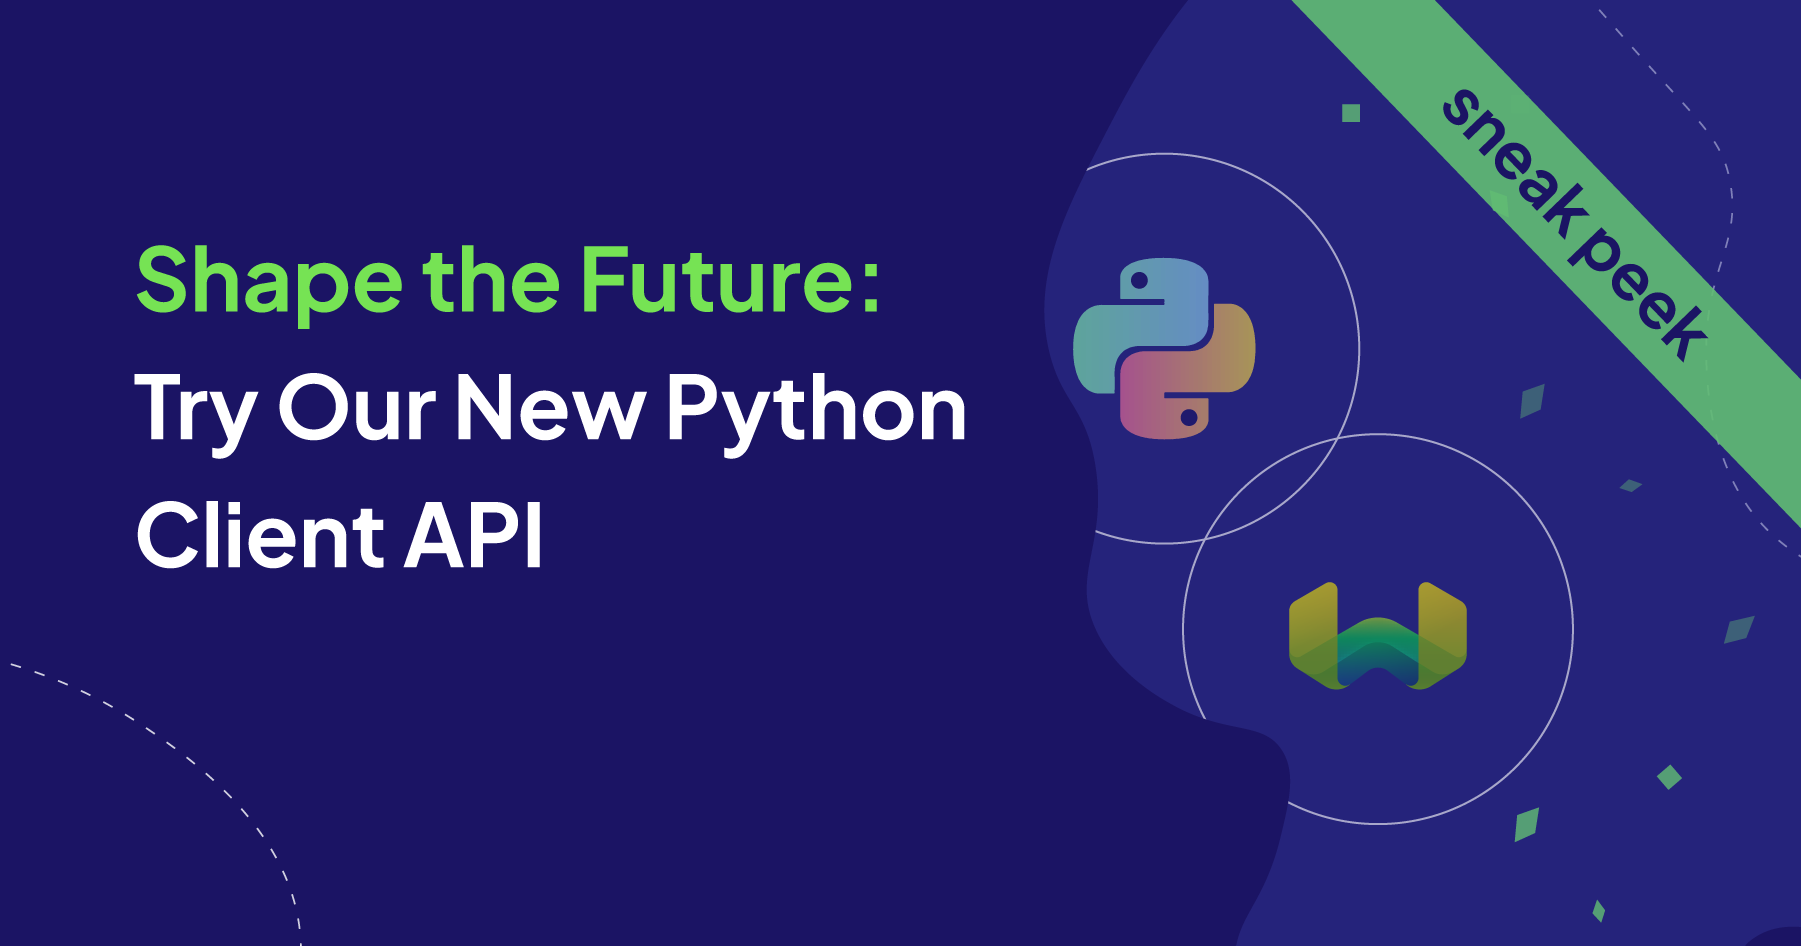 The pre-release Weaviate Python client with a new API